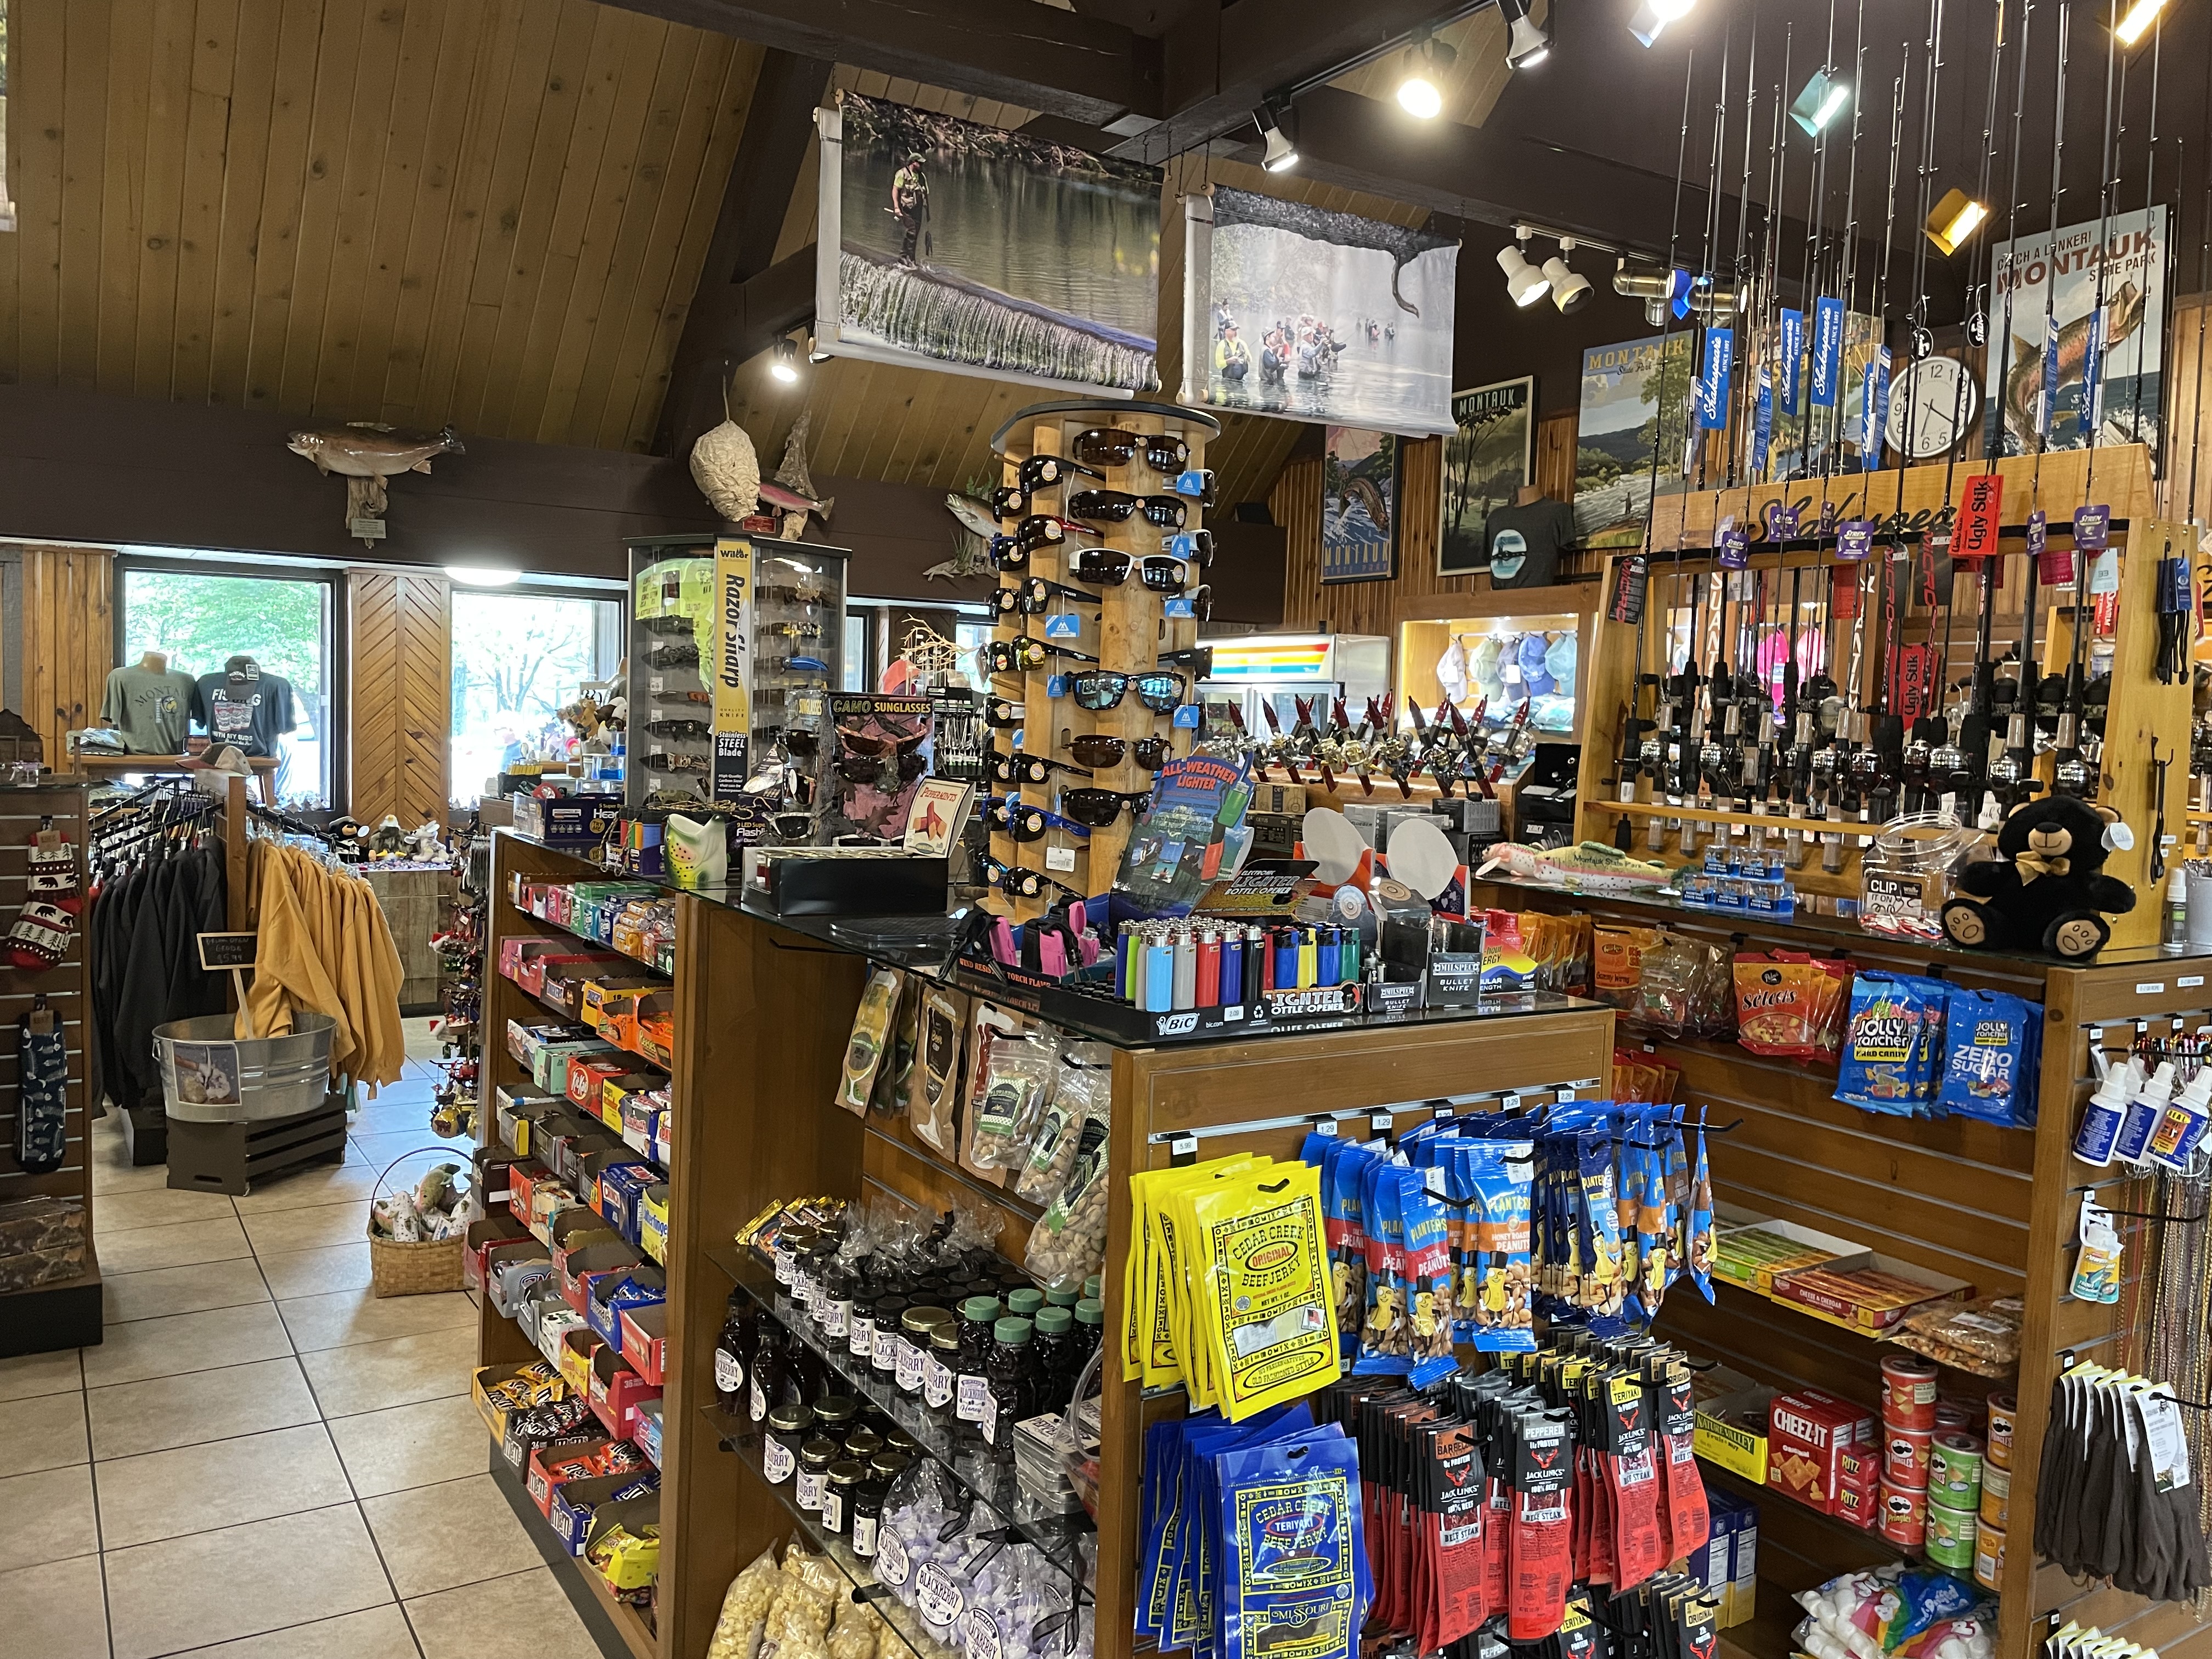 Apparel, snacks and fishing supplies inside the park store